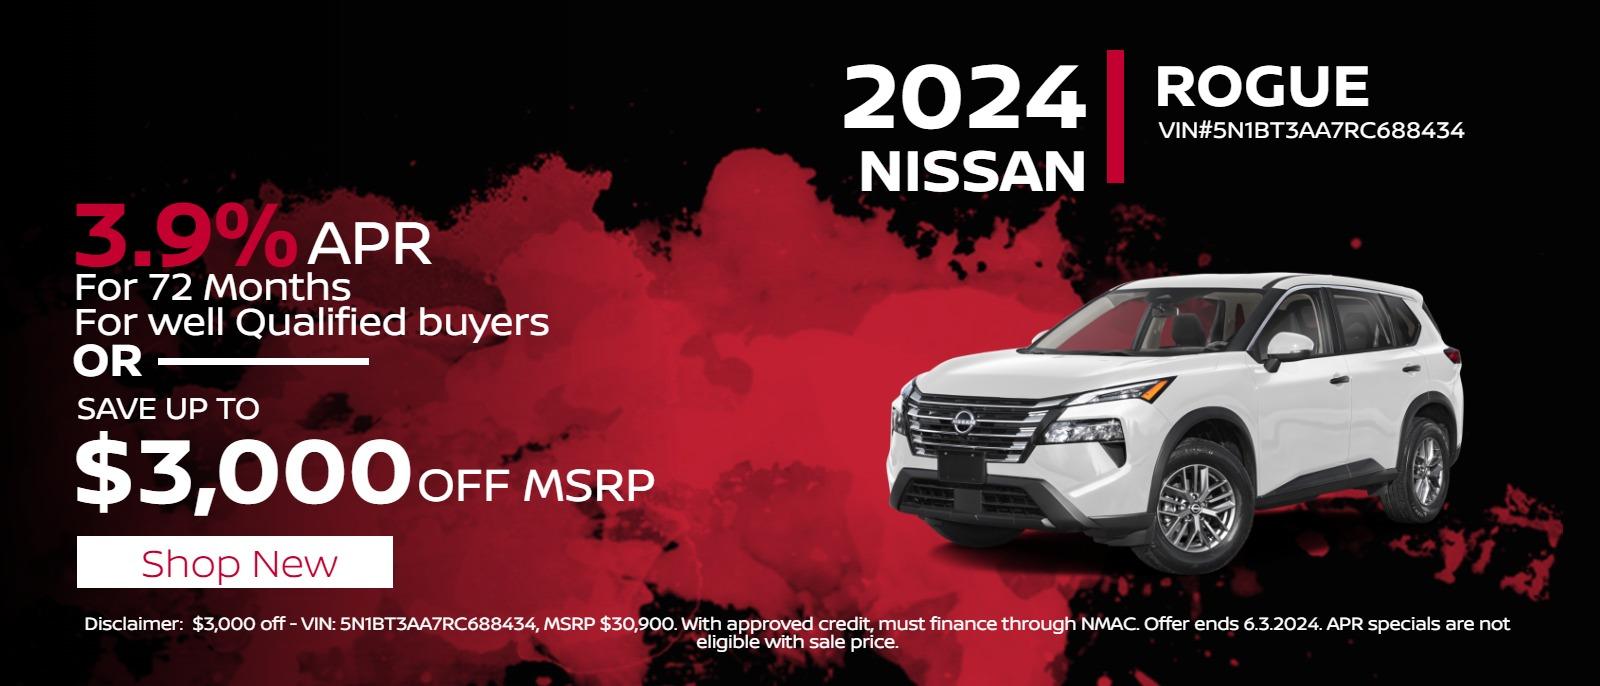 .Rogue
2023 Nissan Rogue
Save up to
$3,000
Off MSRP

Or

3.9%
APR Financing
For 72mos.
For well Qualified buyers